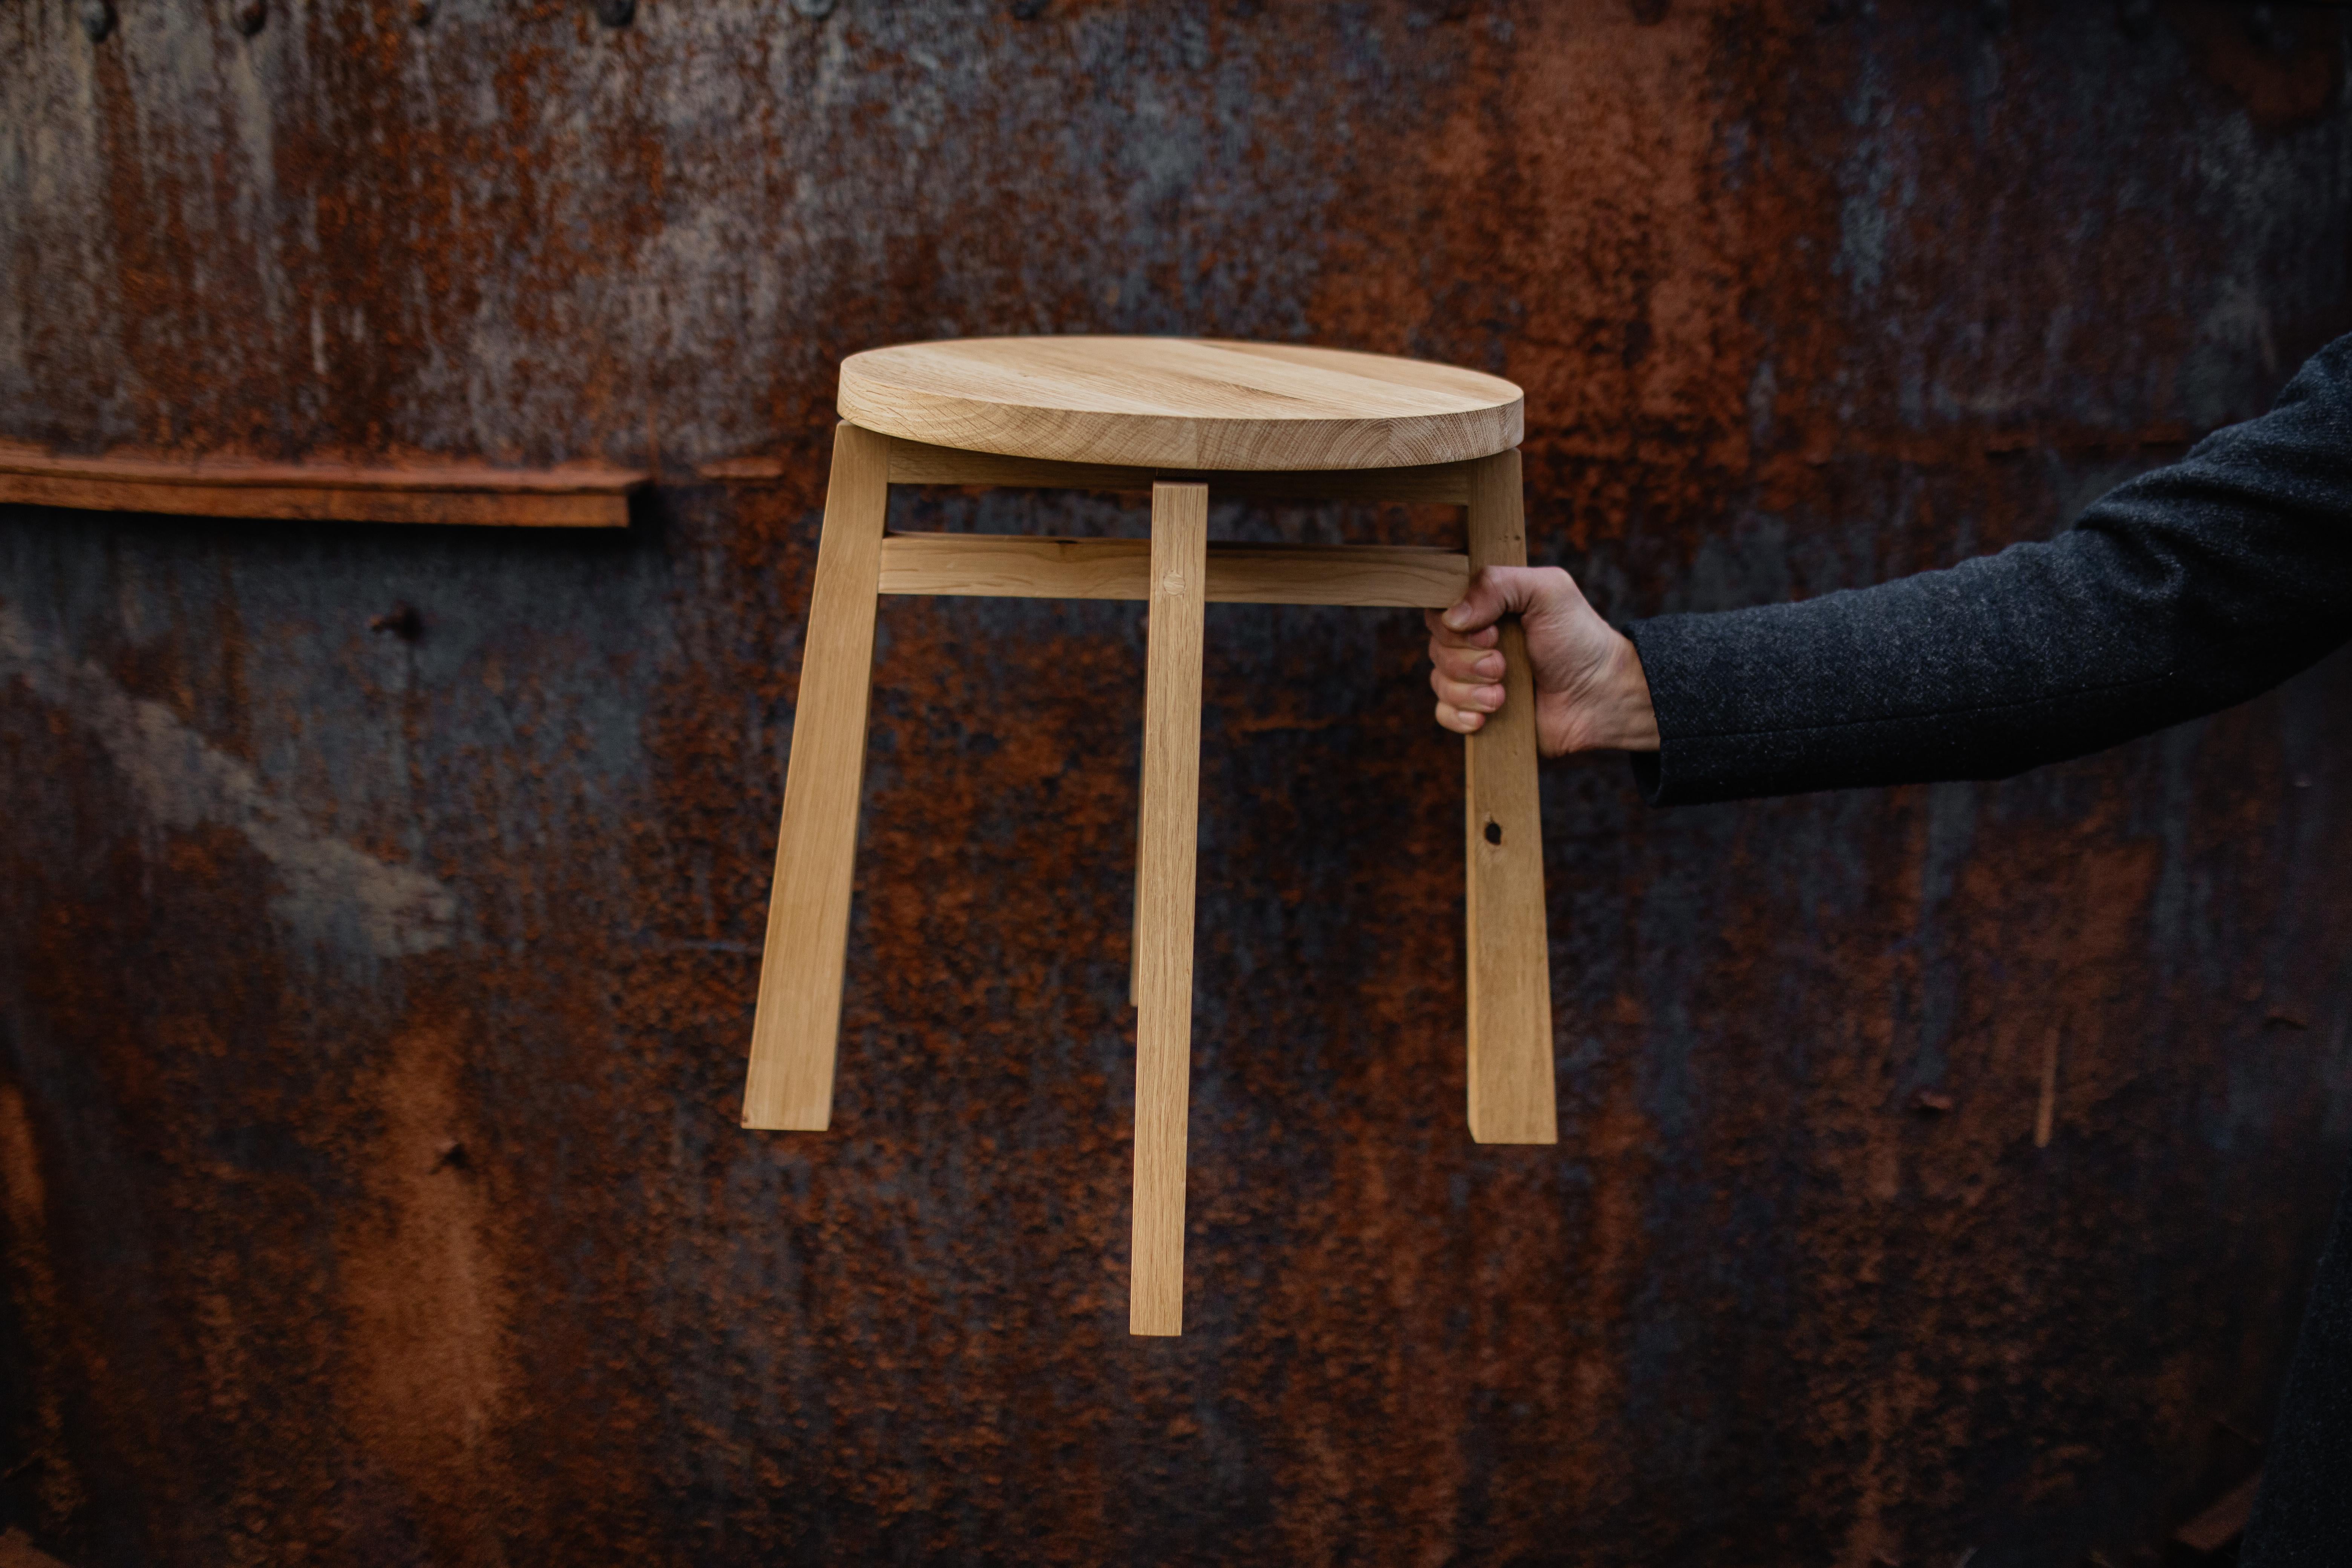 This stool is hand made in hard wood that is sustainably sourced, covered with a natural oil to bring out the woods natural colors and grains. 

These furniture pieces were created to be able to mentor and teach people on, but also to still be a